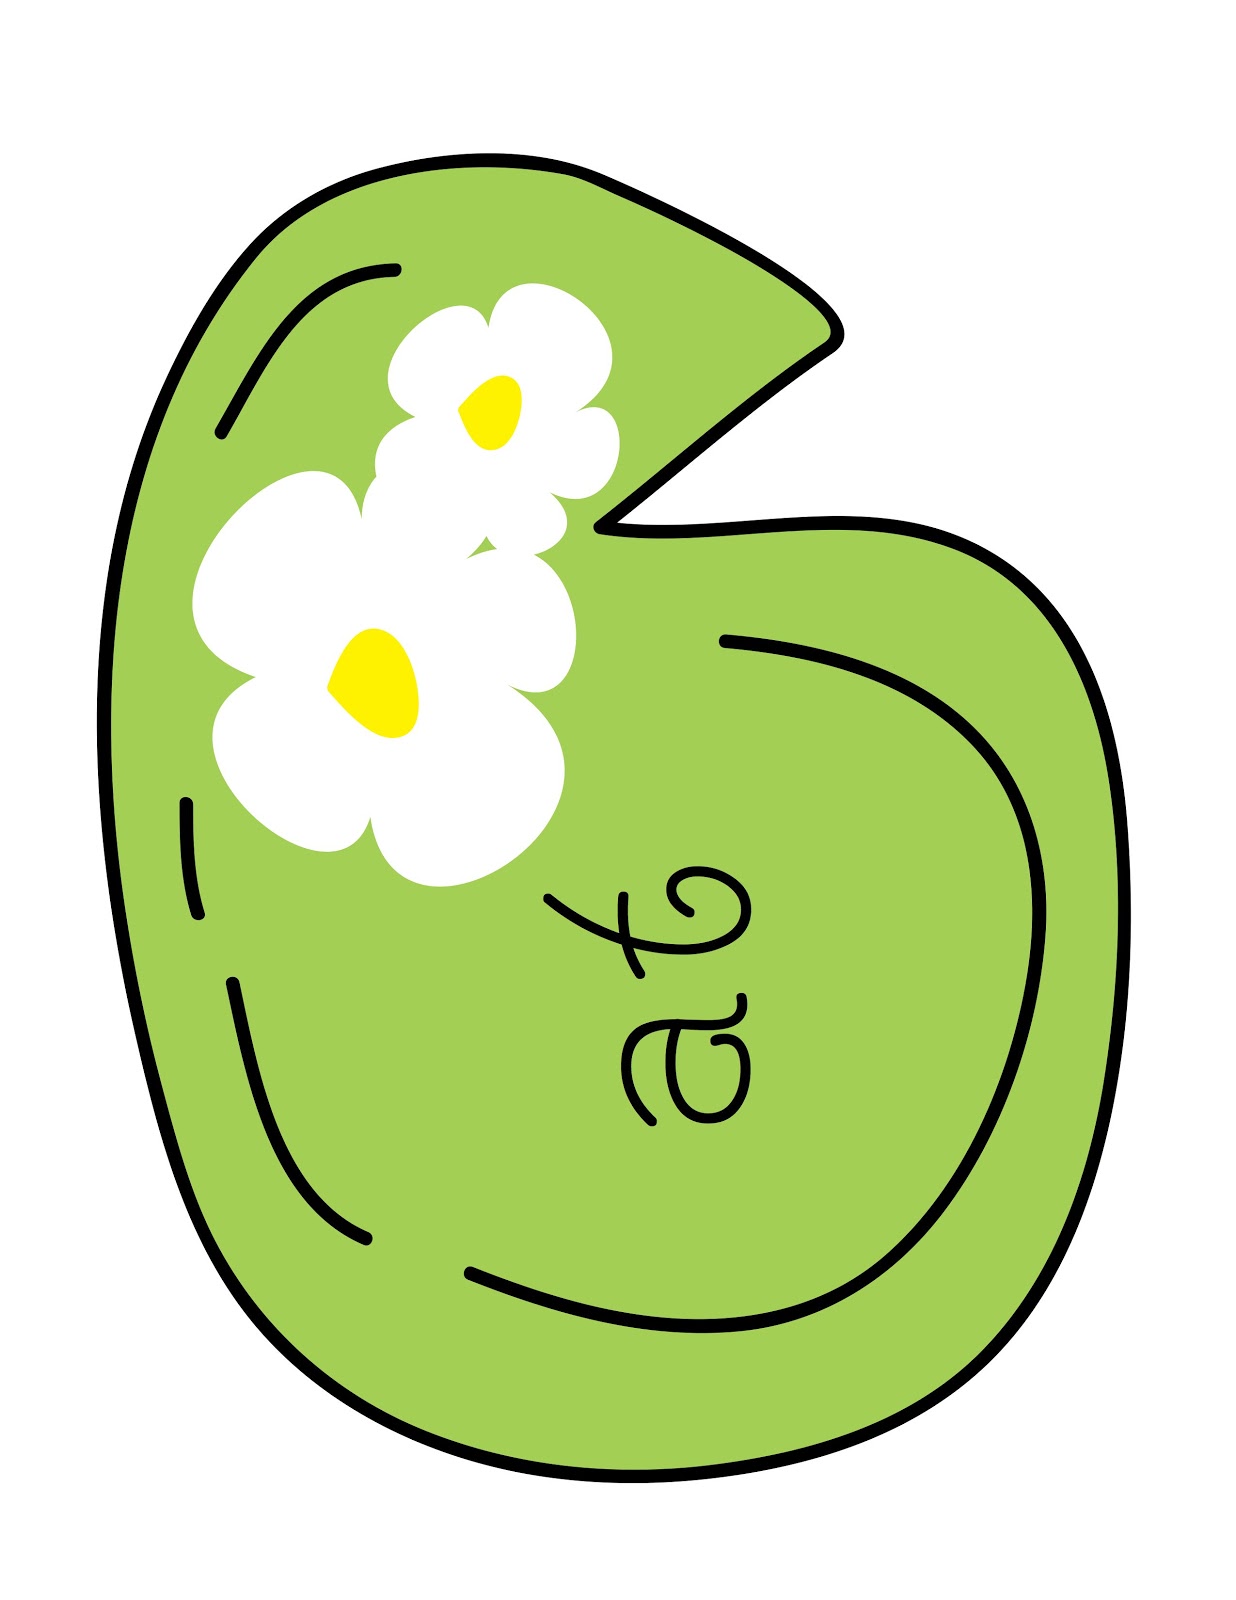 Lily pad clipart free.